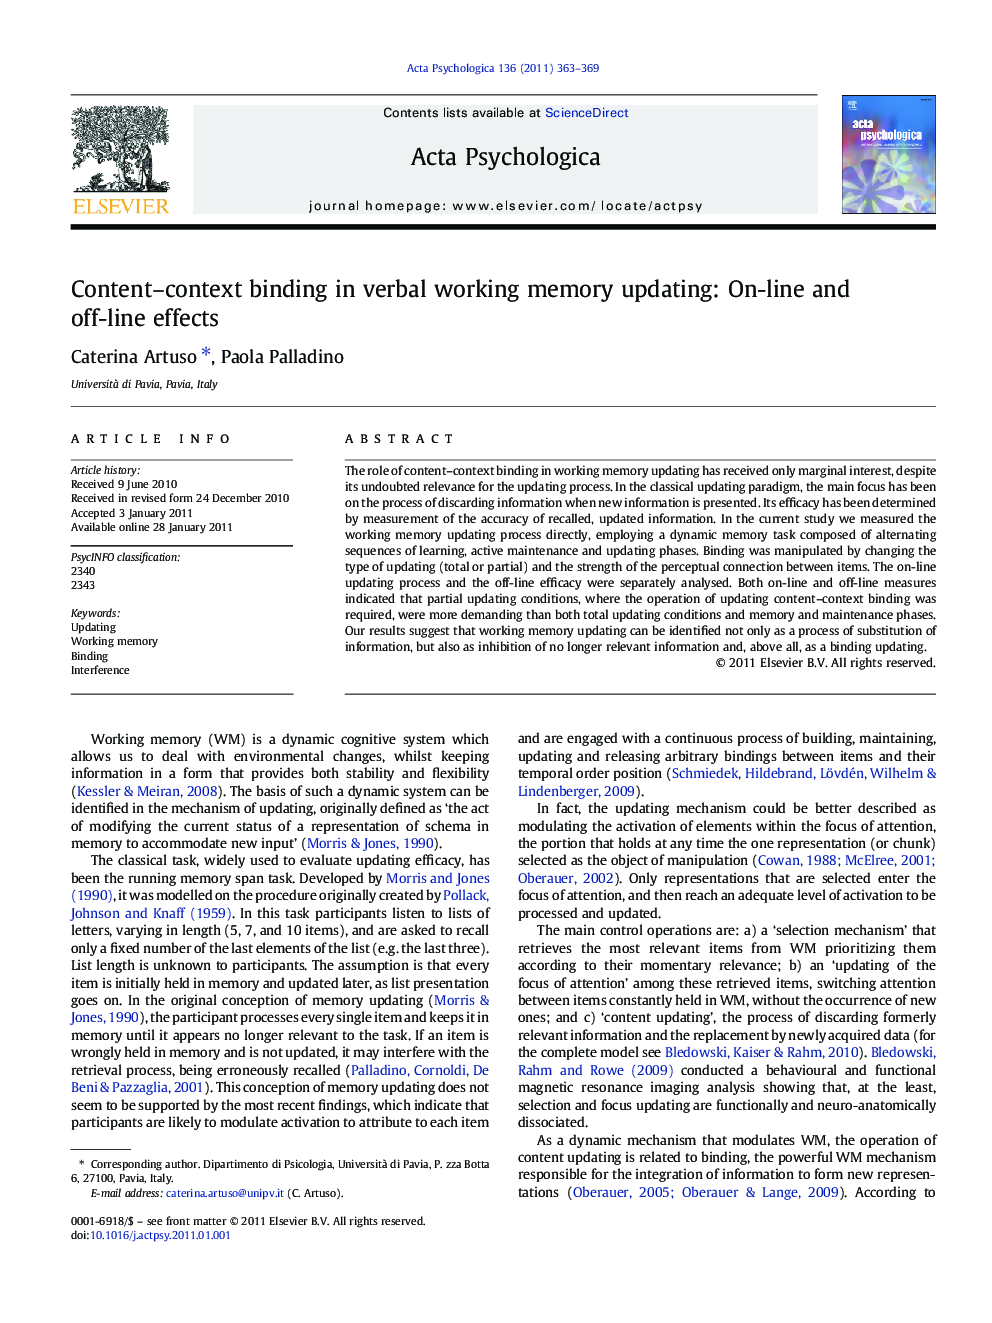 Content–context binding in verbal working memory updating: On-line and off-line effects